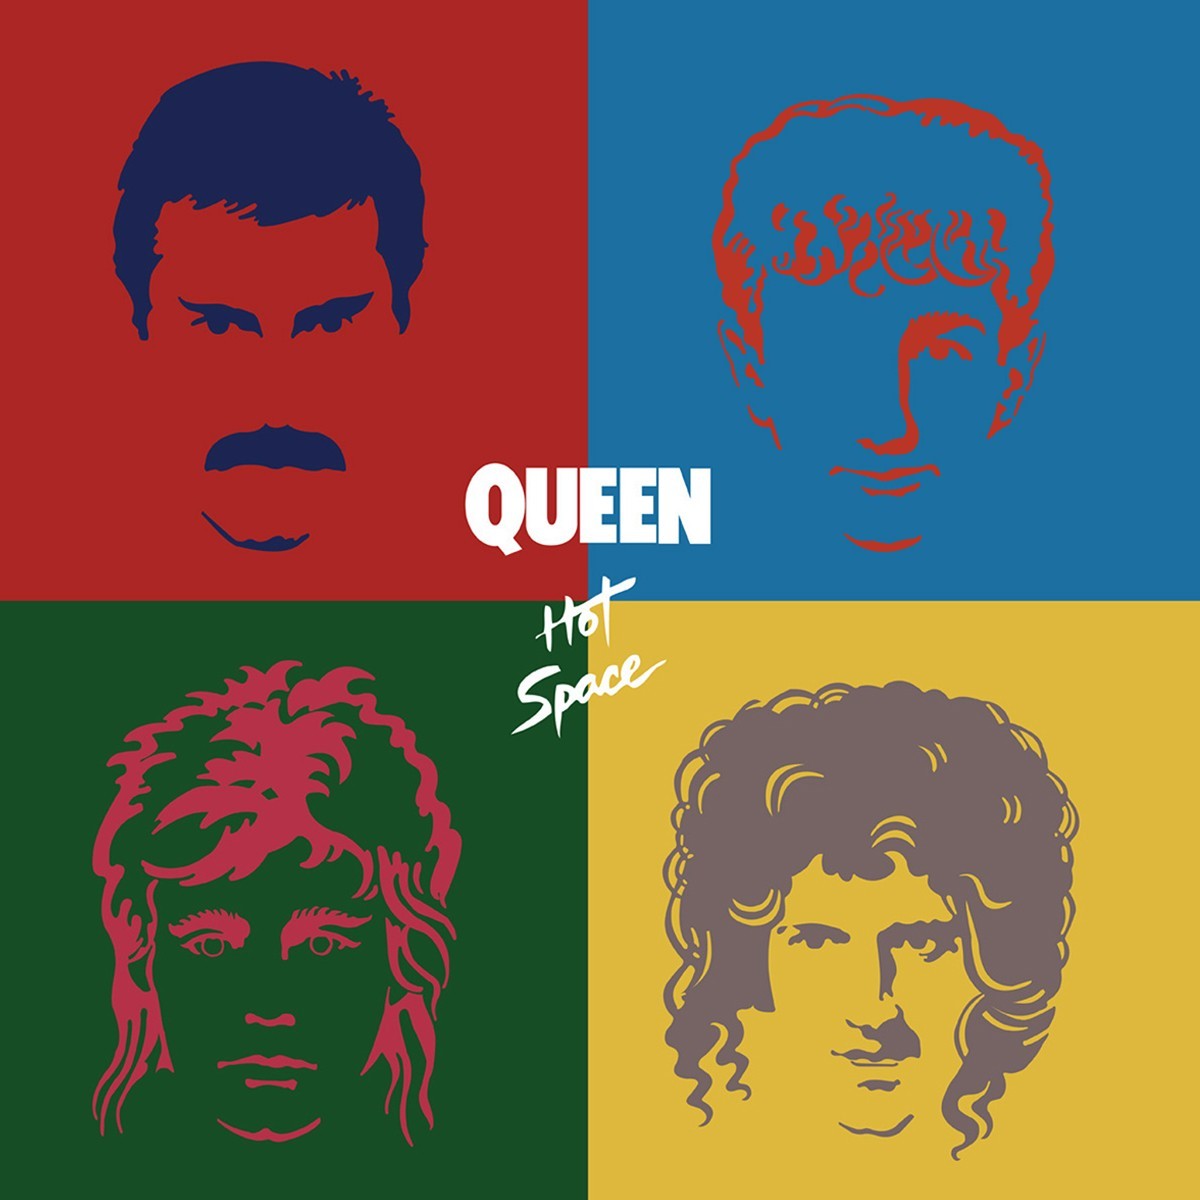 Cover of the album Queen "Hot Space"